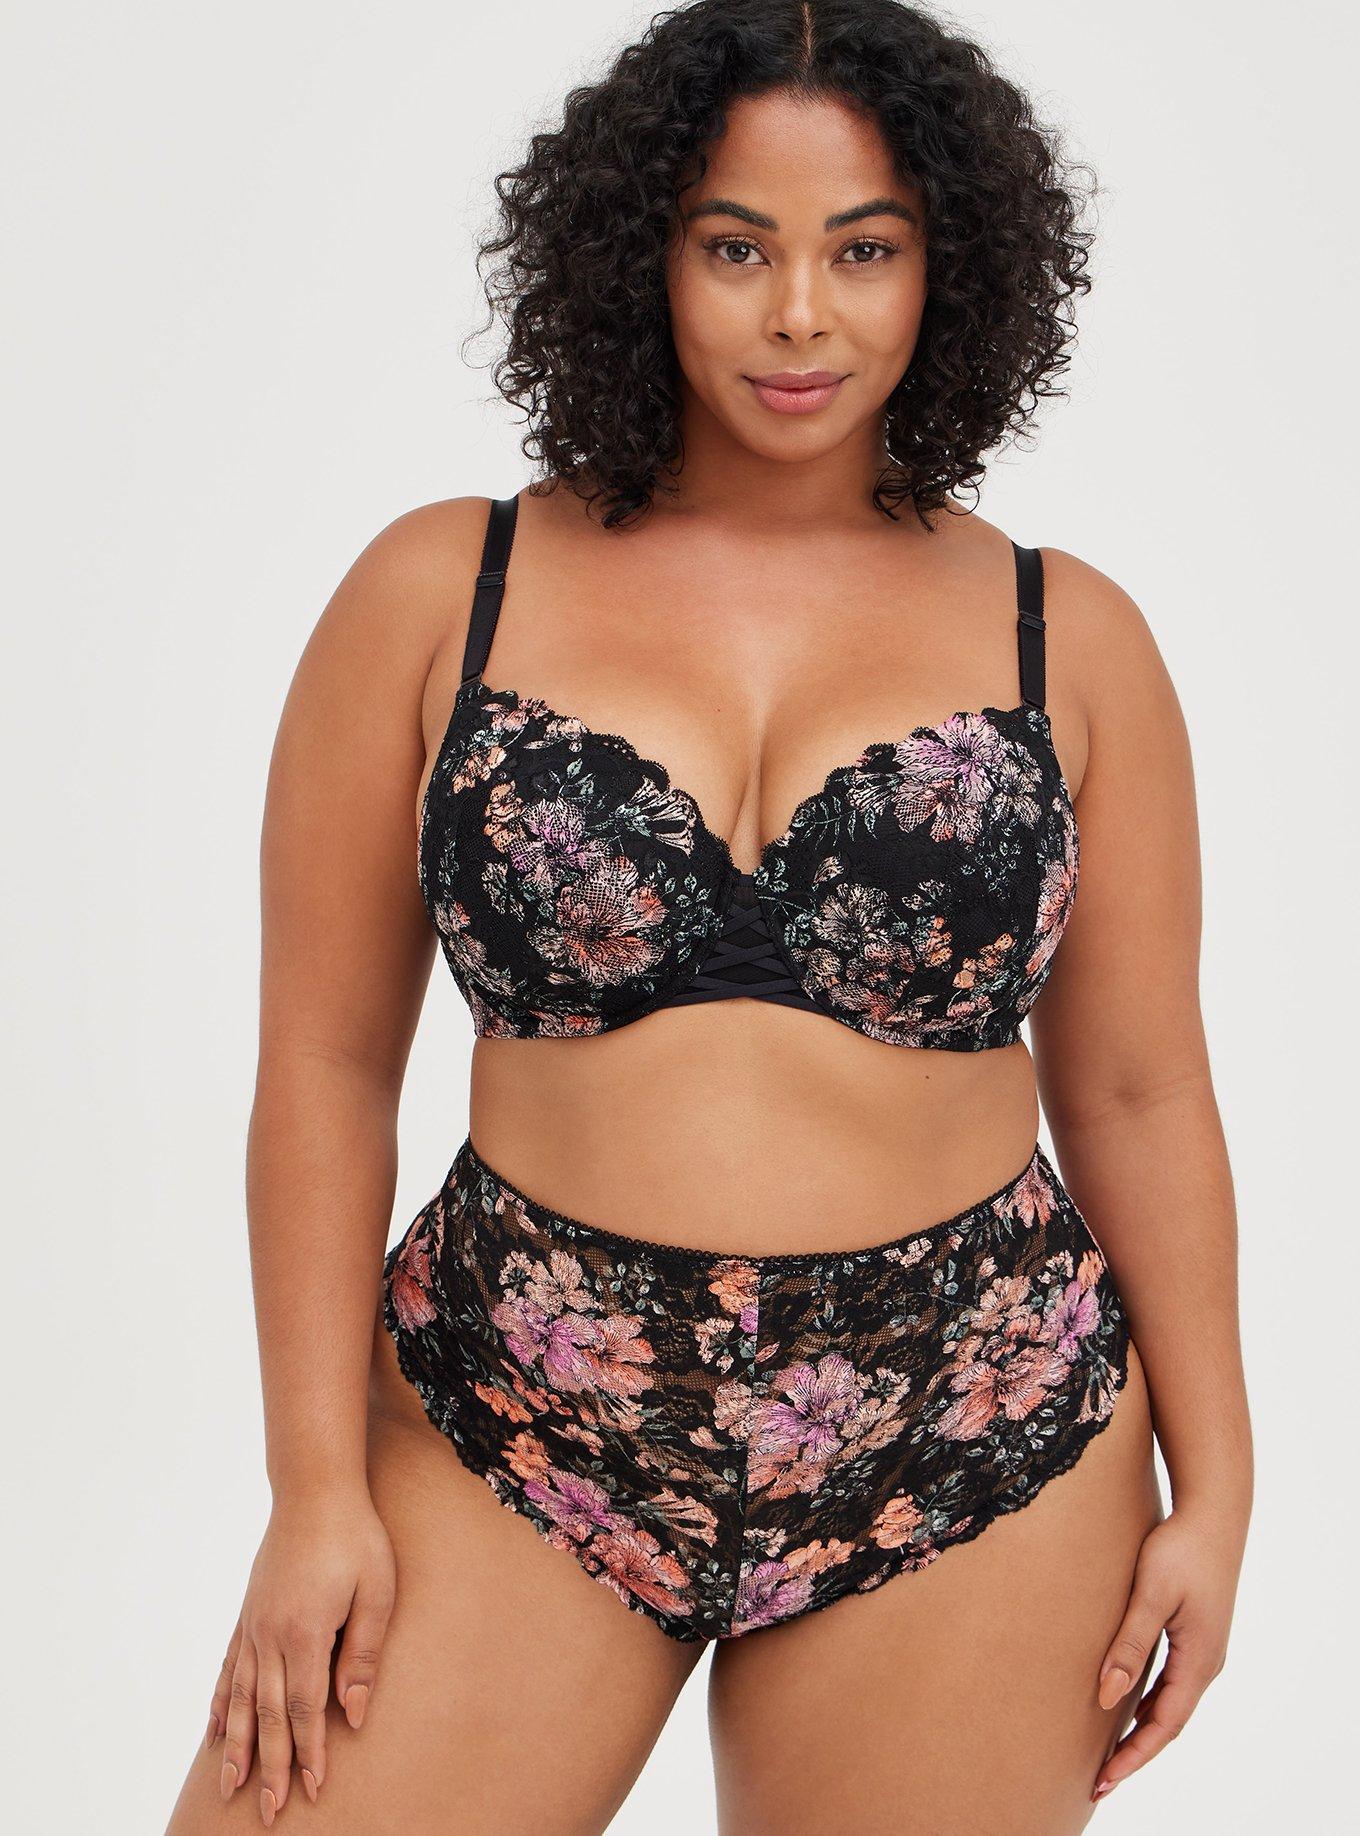 TORRID CURVE COLLECTION UNLINED DEMI BRA: WHITE/LACE: NWT: SZ 40C in 2023